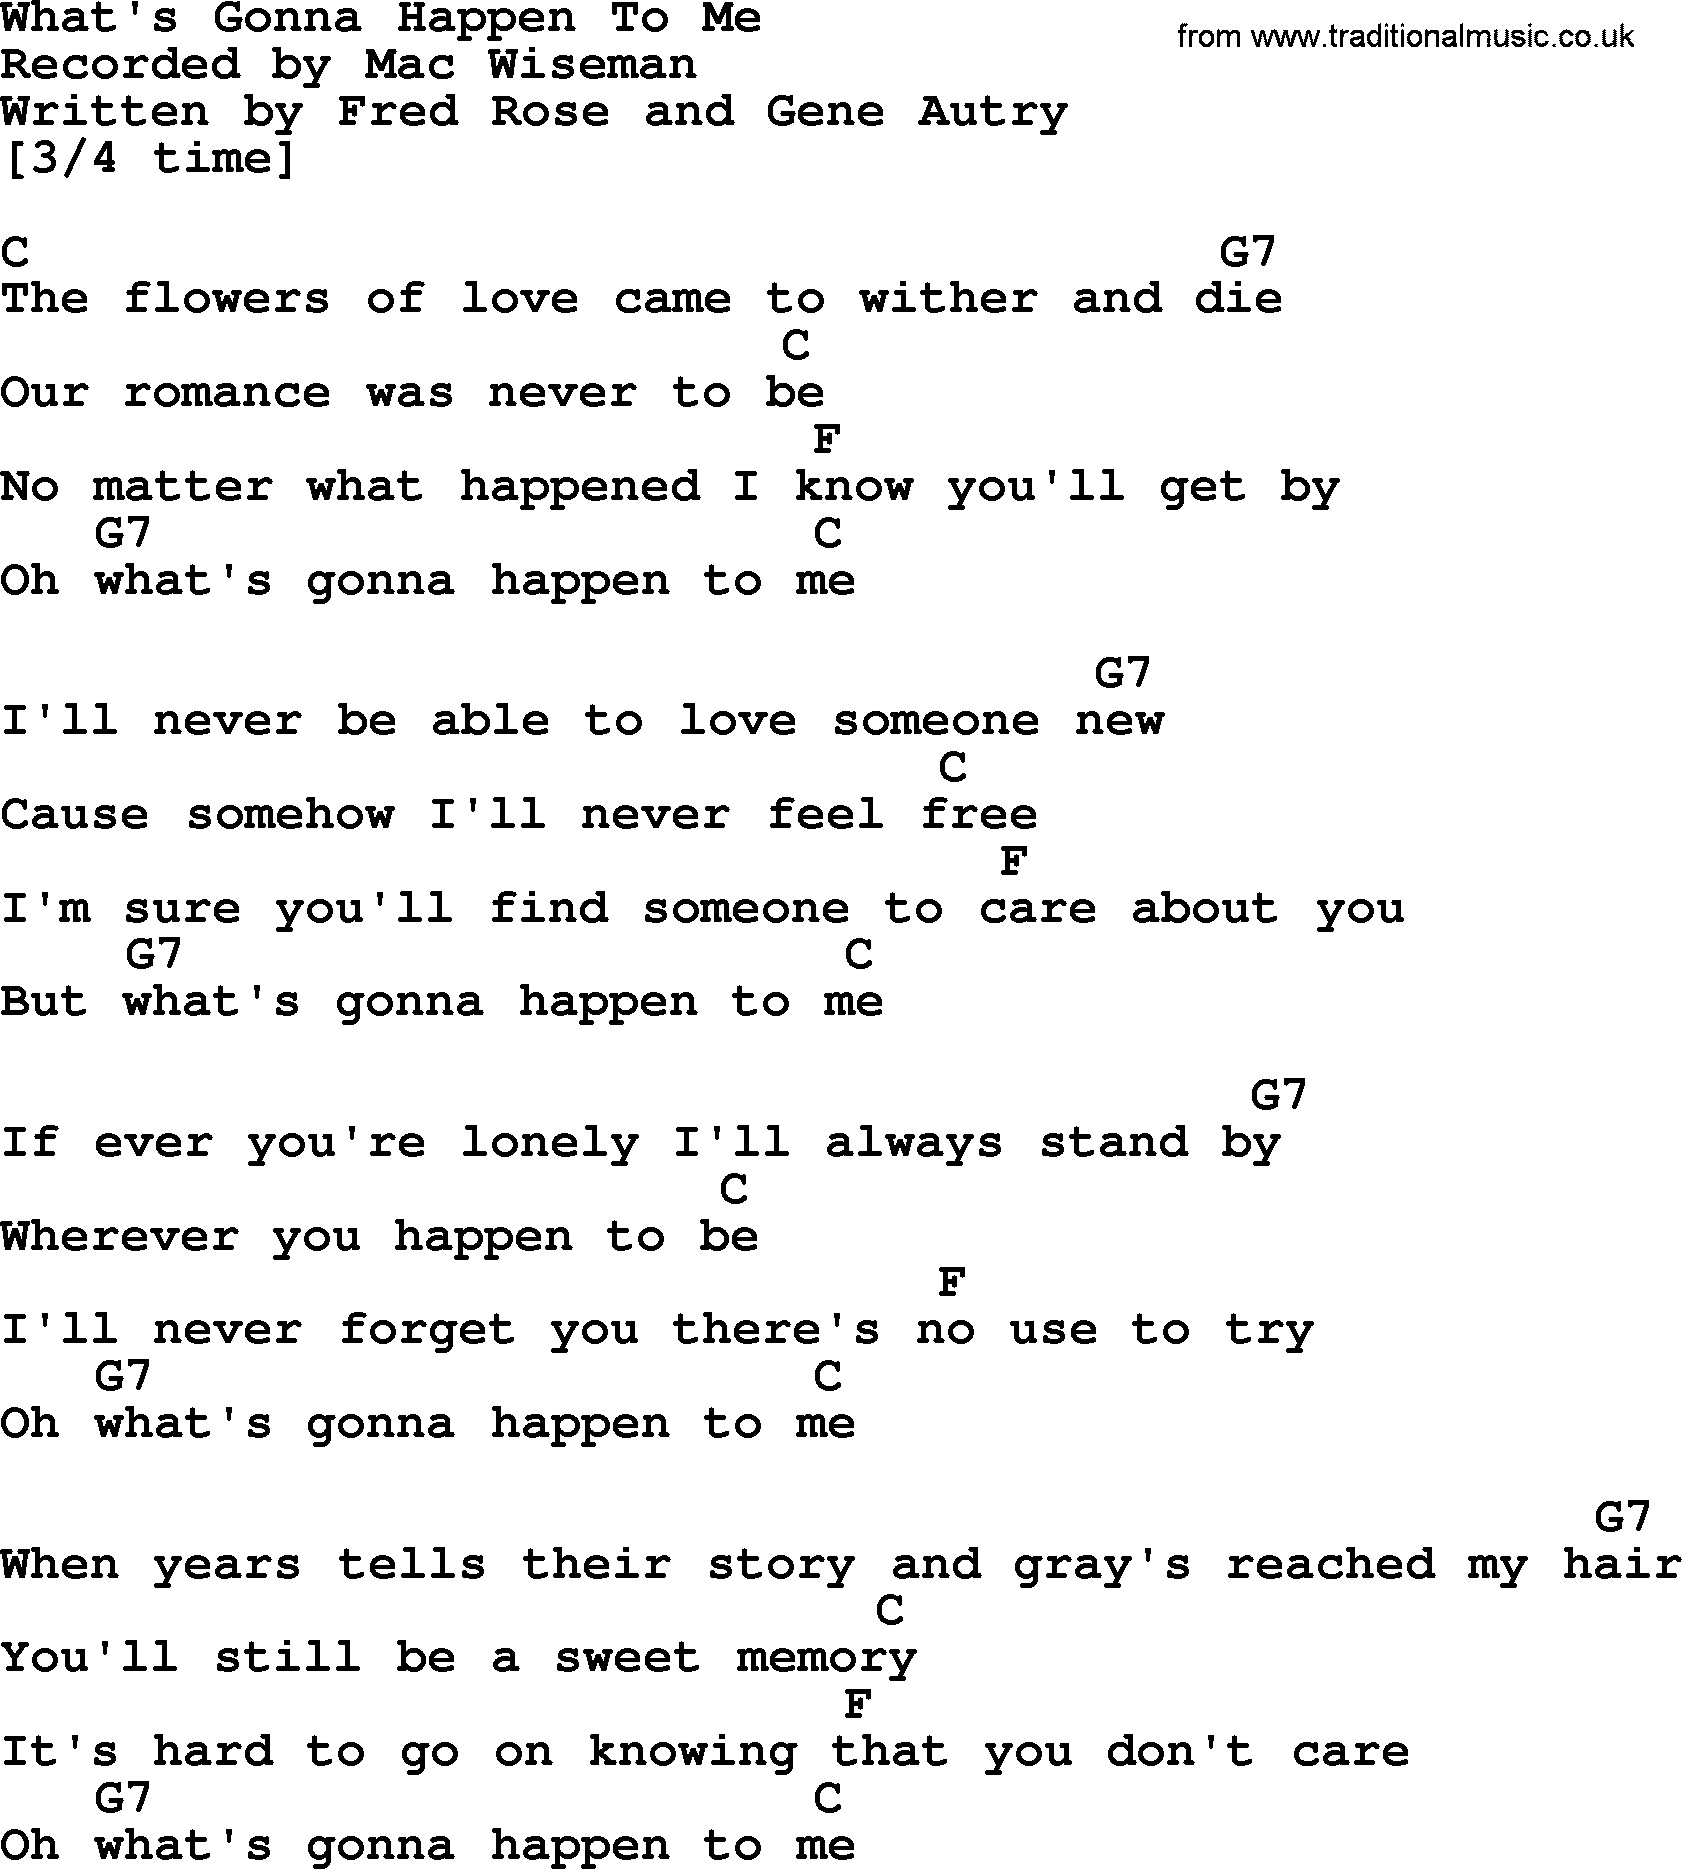 Bluegrass song: What's Gonna Happen To Me, lyrics and chords